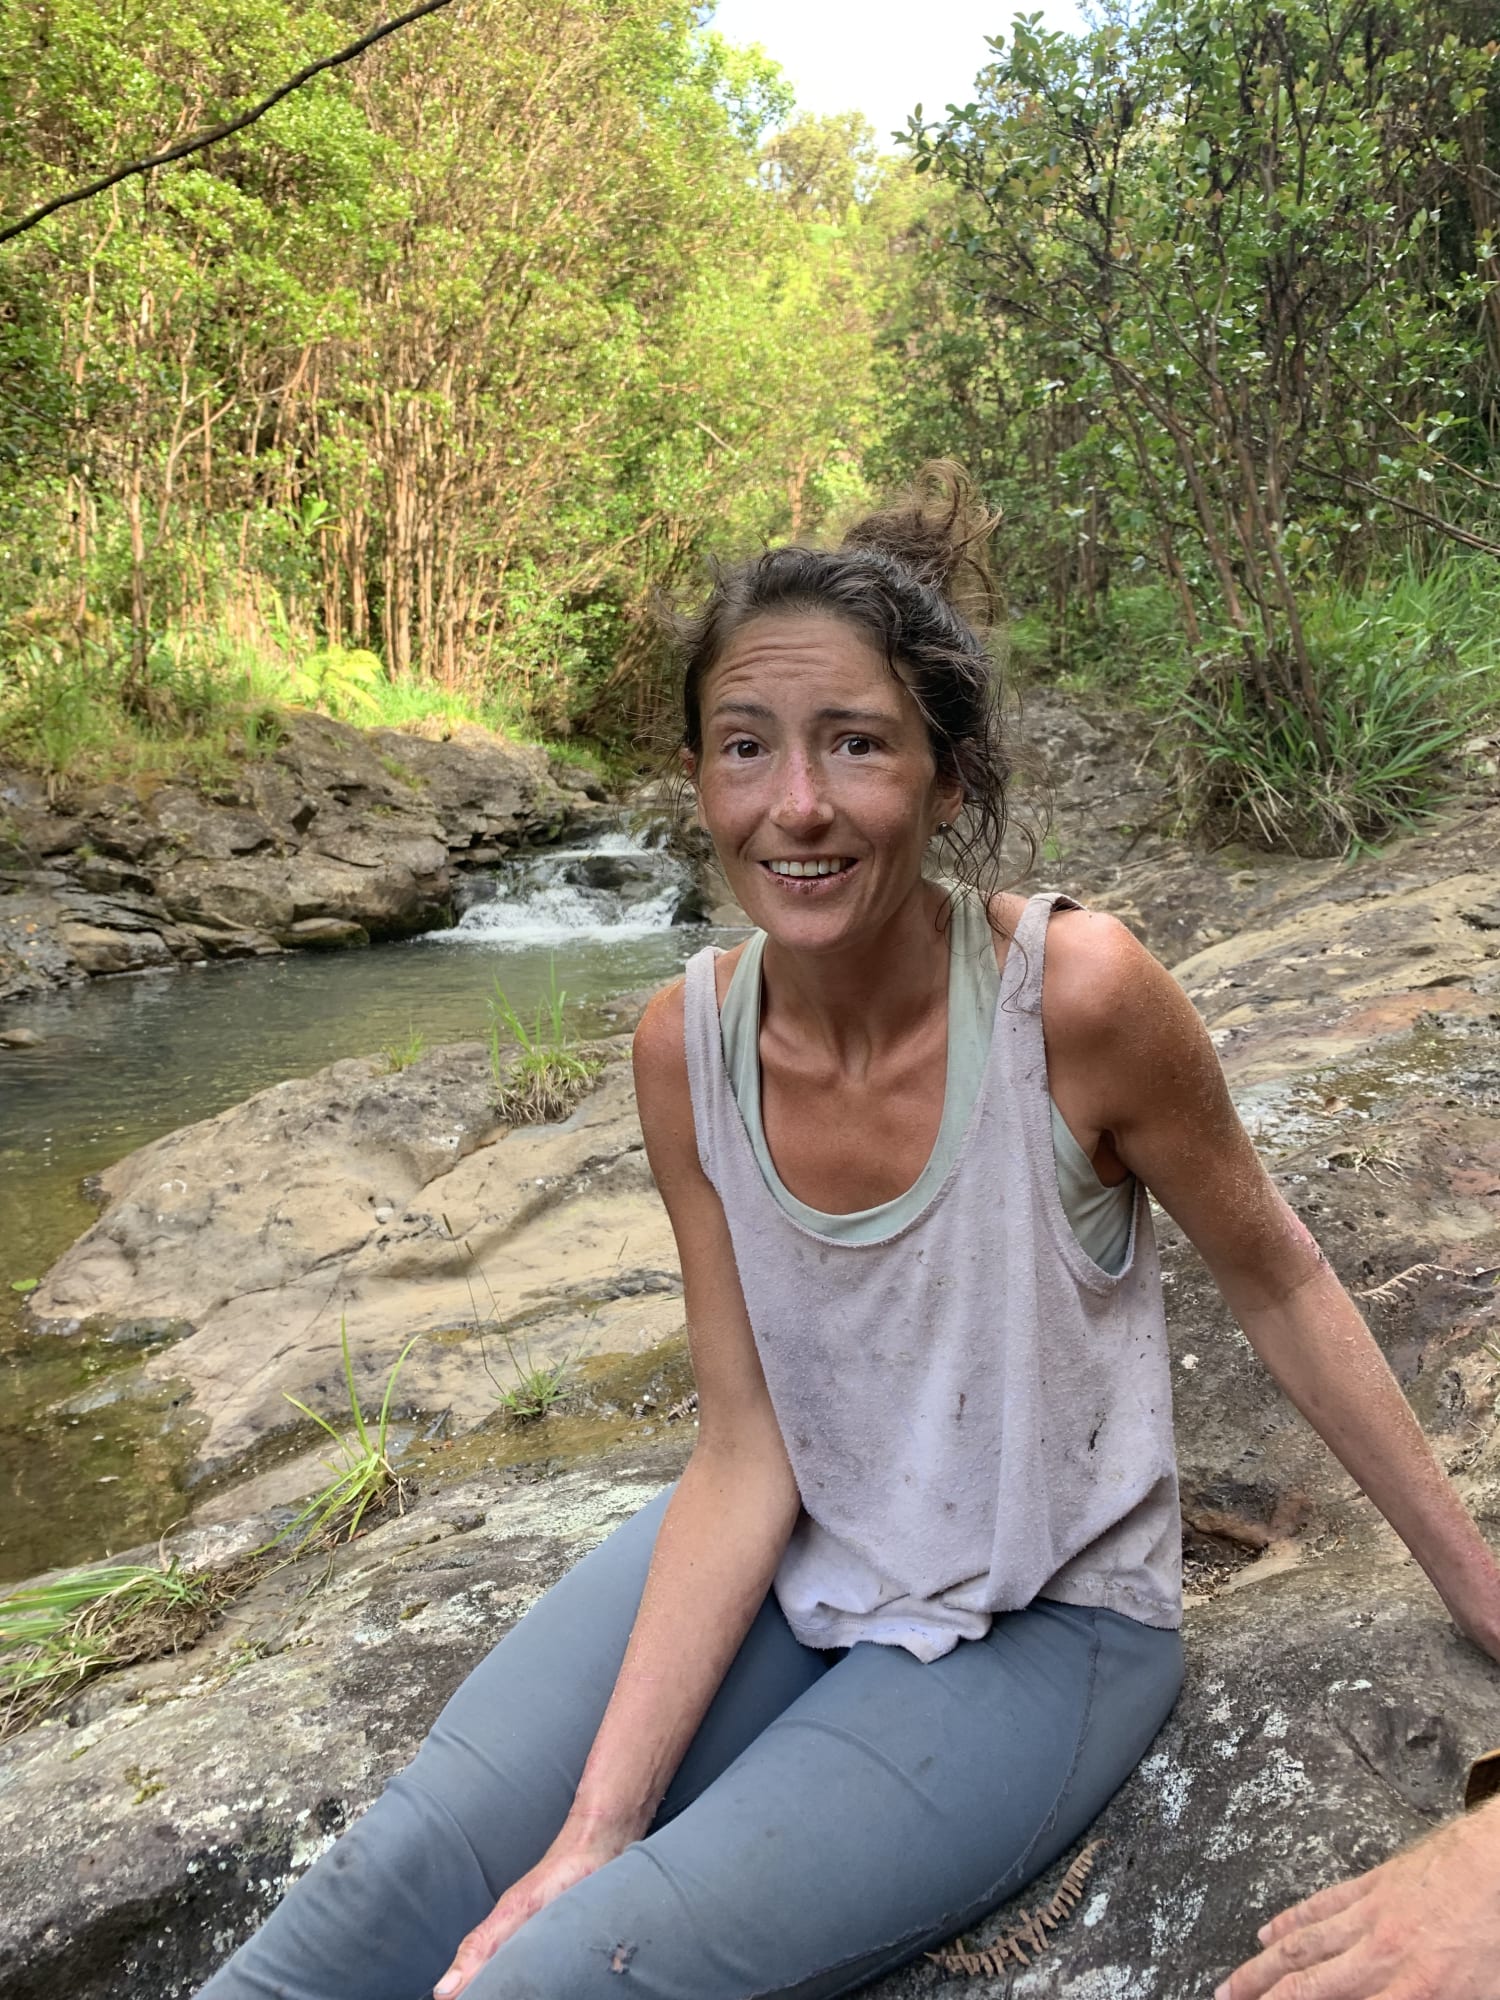 Missing Hawaii hiker says she 'chose life' after falling from cliff while  lost in forest